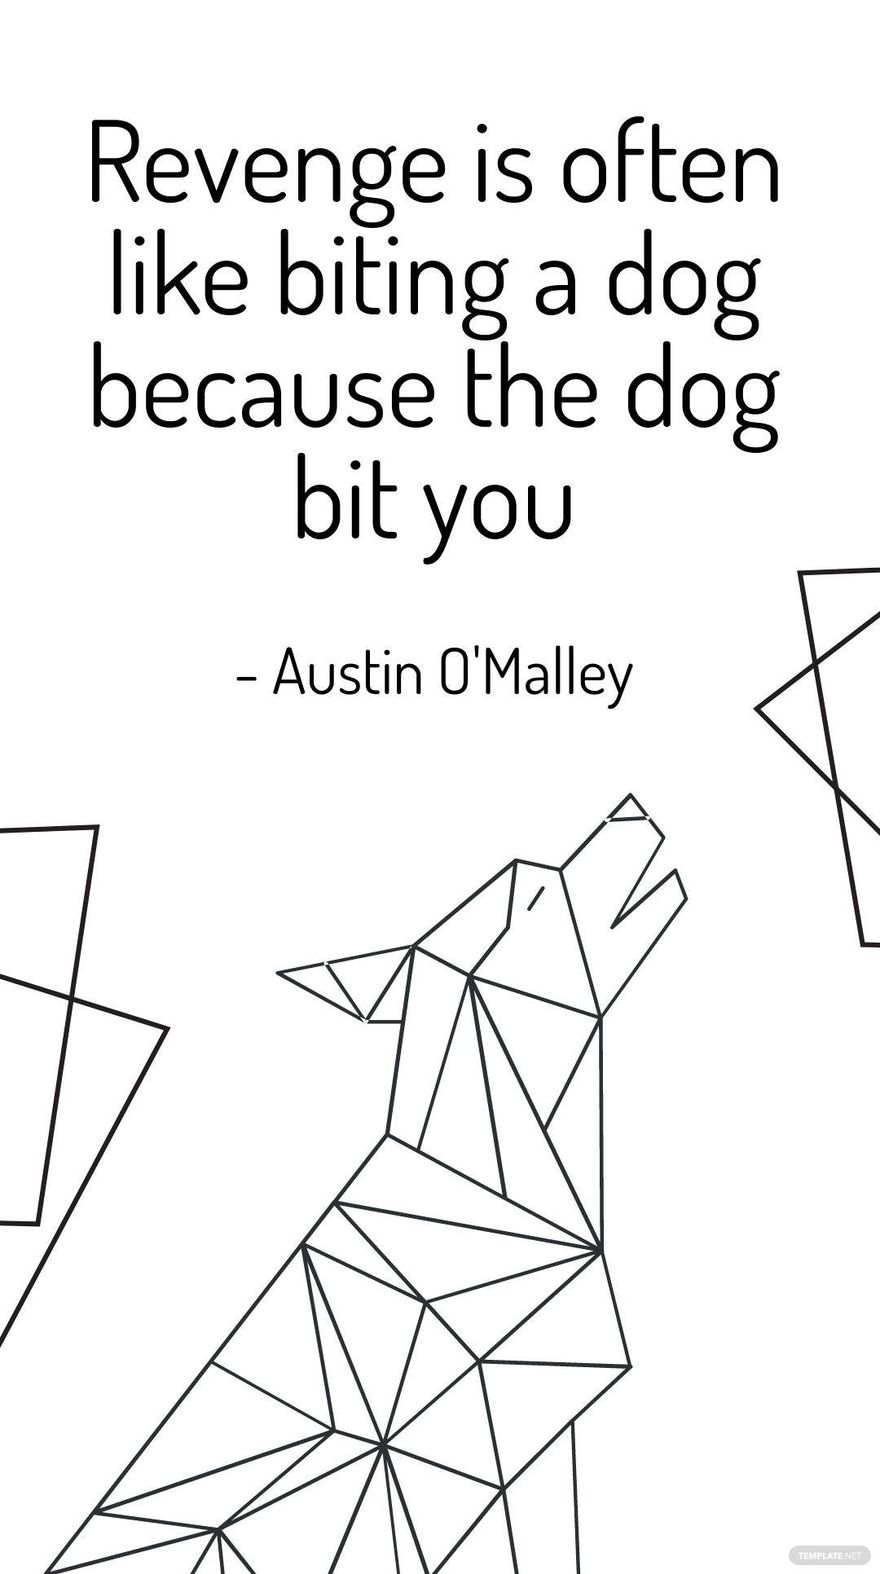 Free Austin O'Malley - Revenge is often like biting a dog because the dog bit you in JPG